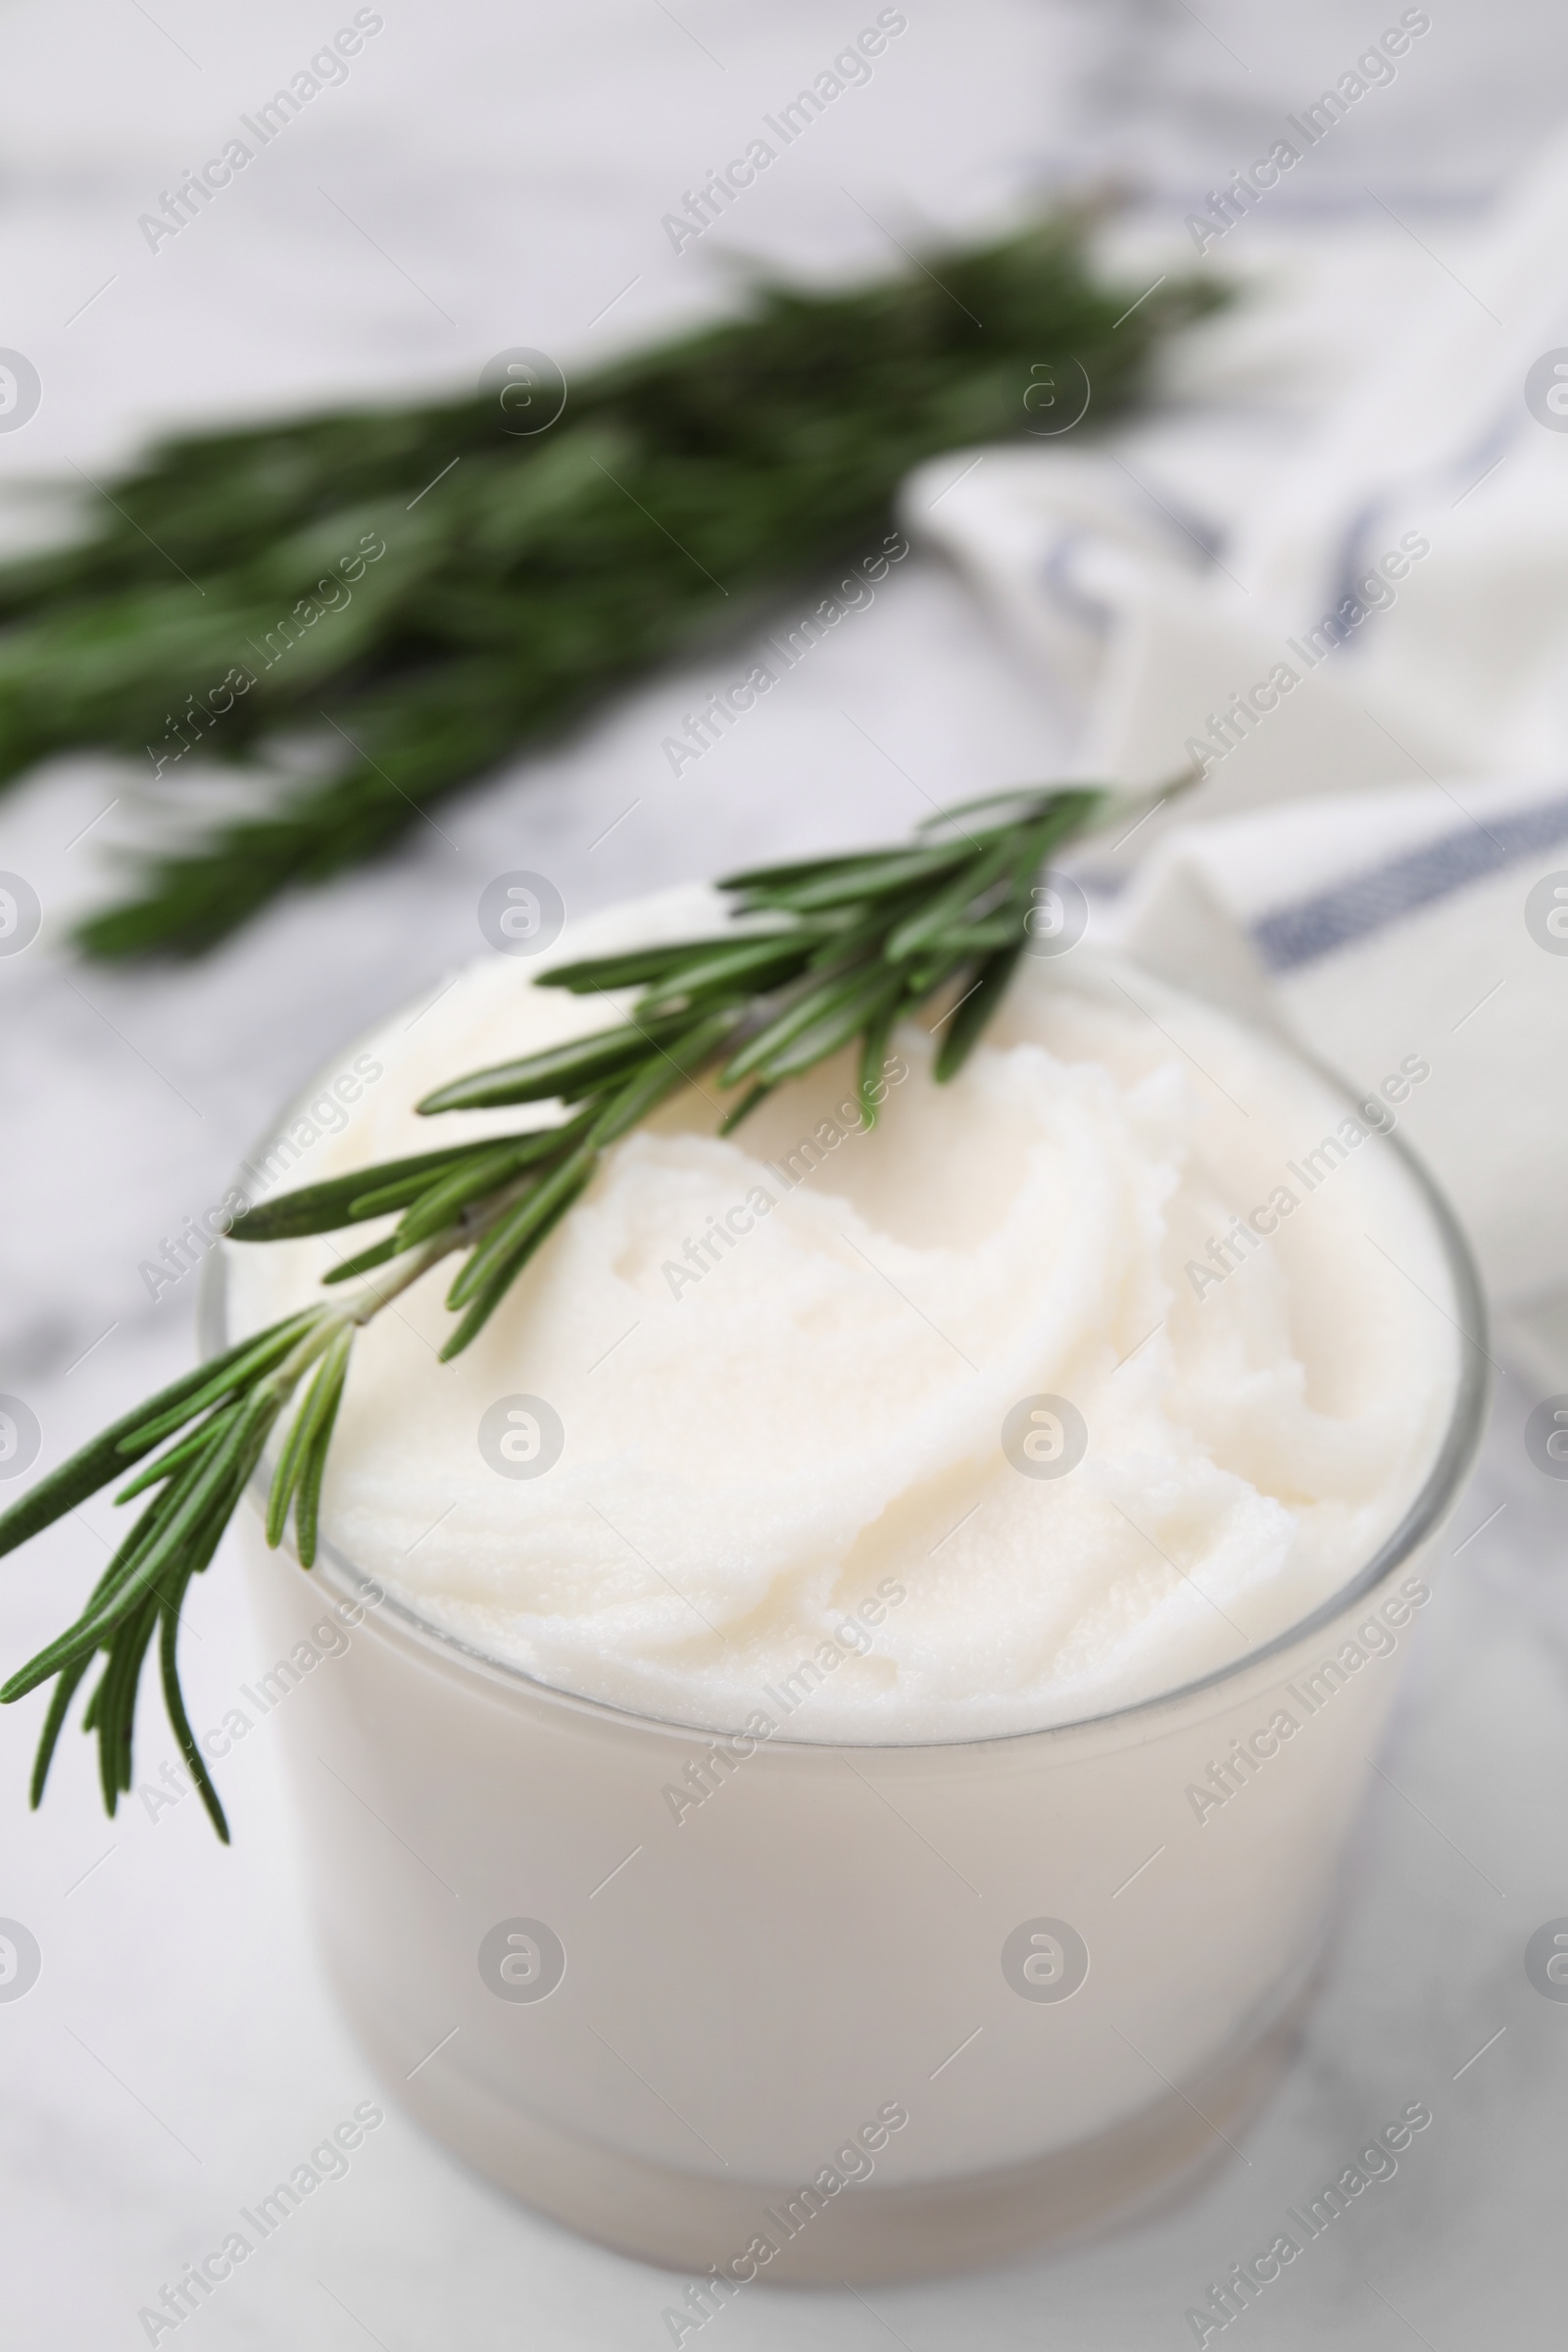 Photo of Delicious pork lard with rosemary in glass on white marble table, closeup